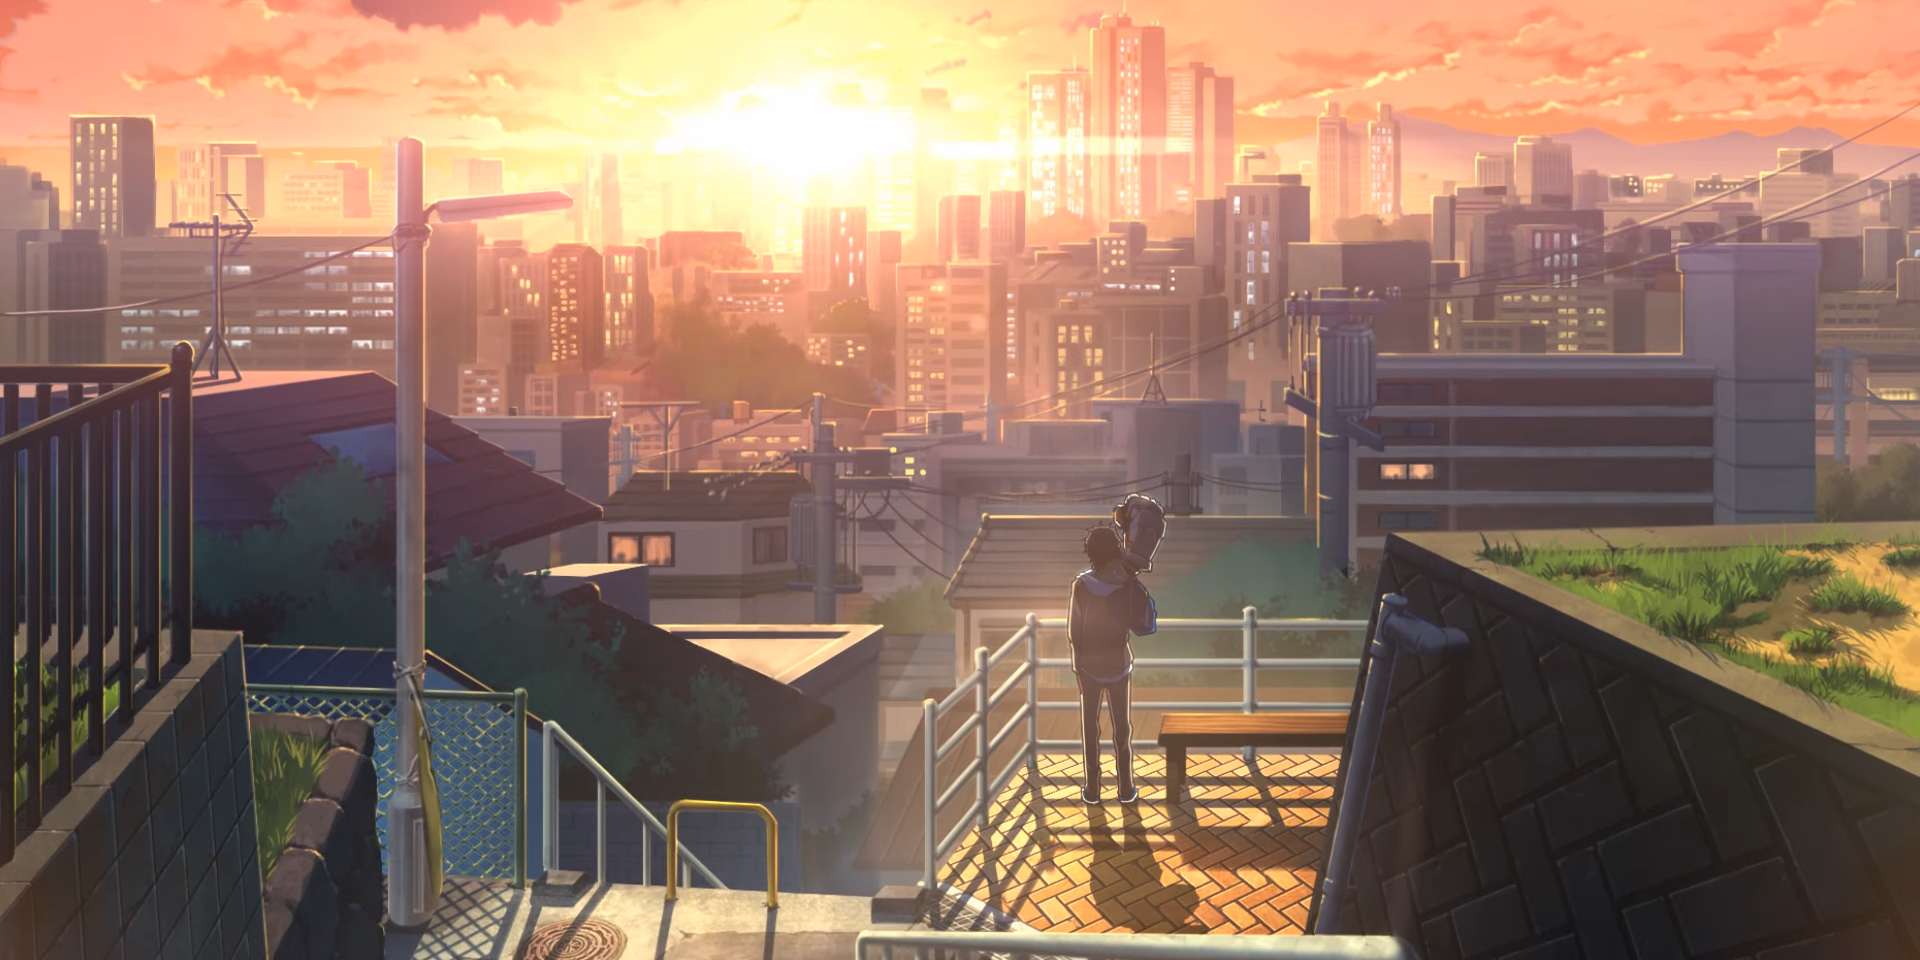 Scenery shot of Mecha-Ude, showing the distant figures of Hikaru and Alma standing on a hilly section of a Japanese City, with the sun setting in the distance between several high rises.